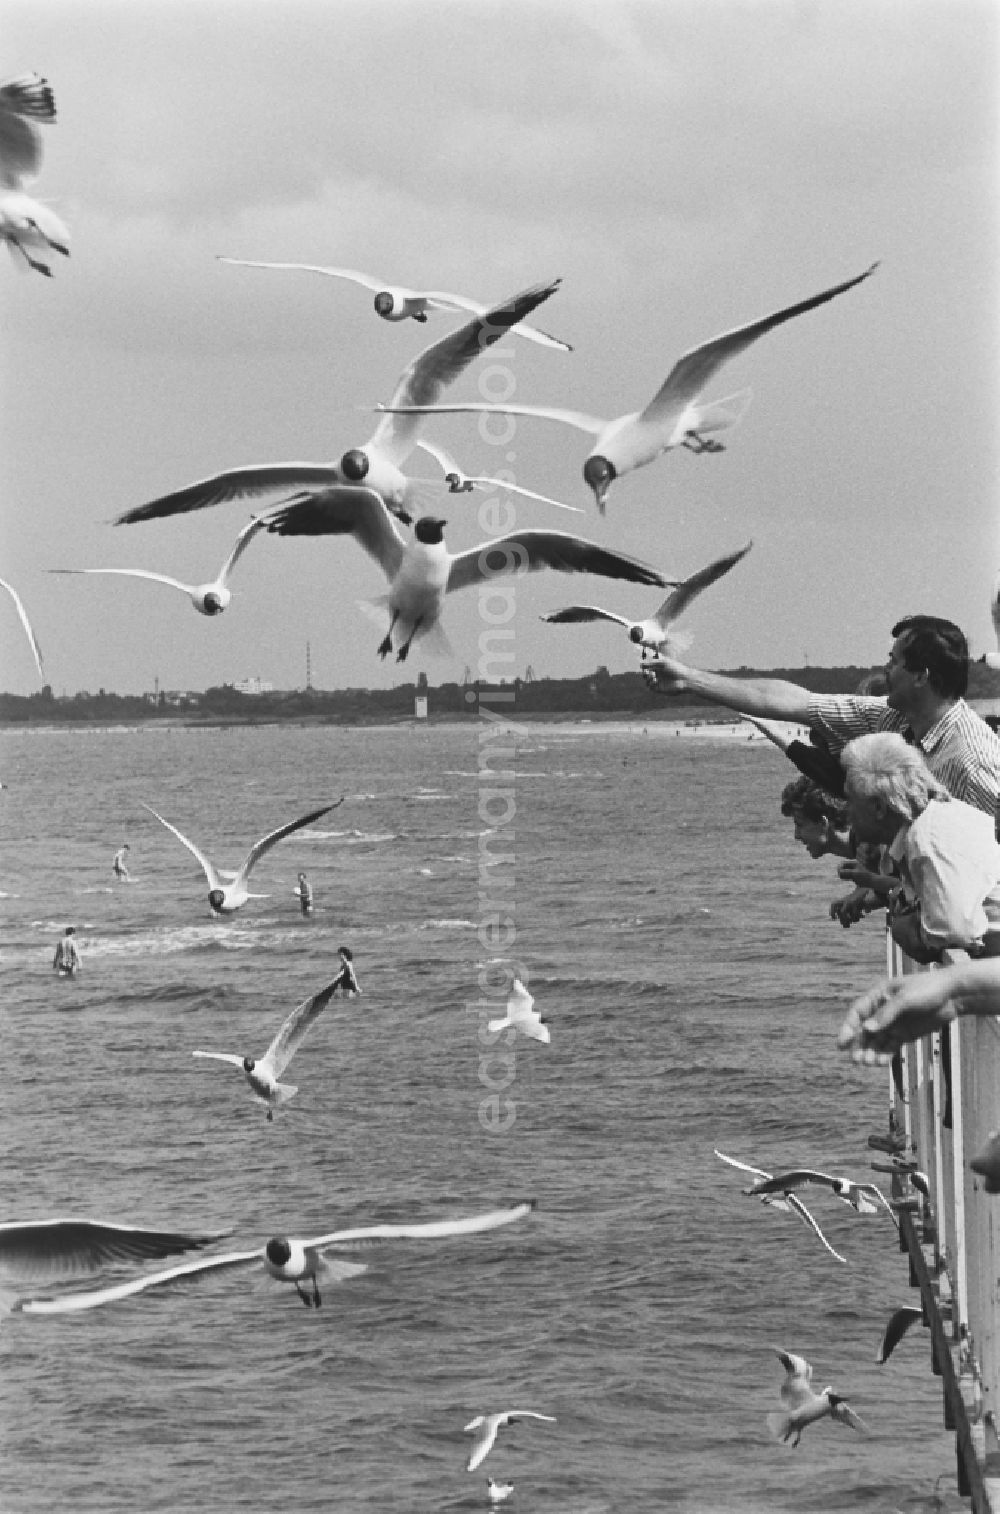 GDR photo archive: Ahlbeck - Seagulls at the pier of the Baltic Sea in Ahlbeck in Mecklenburg-Western Pomerania on the territory of the former GDR, German Democratic Republic